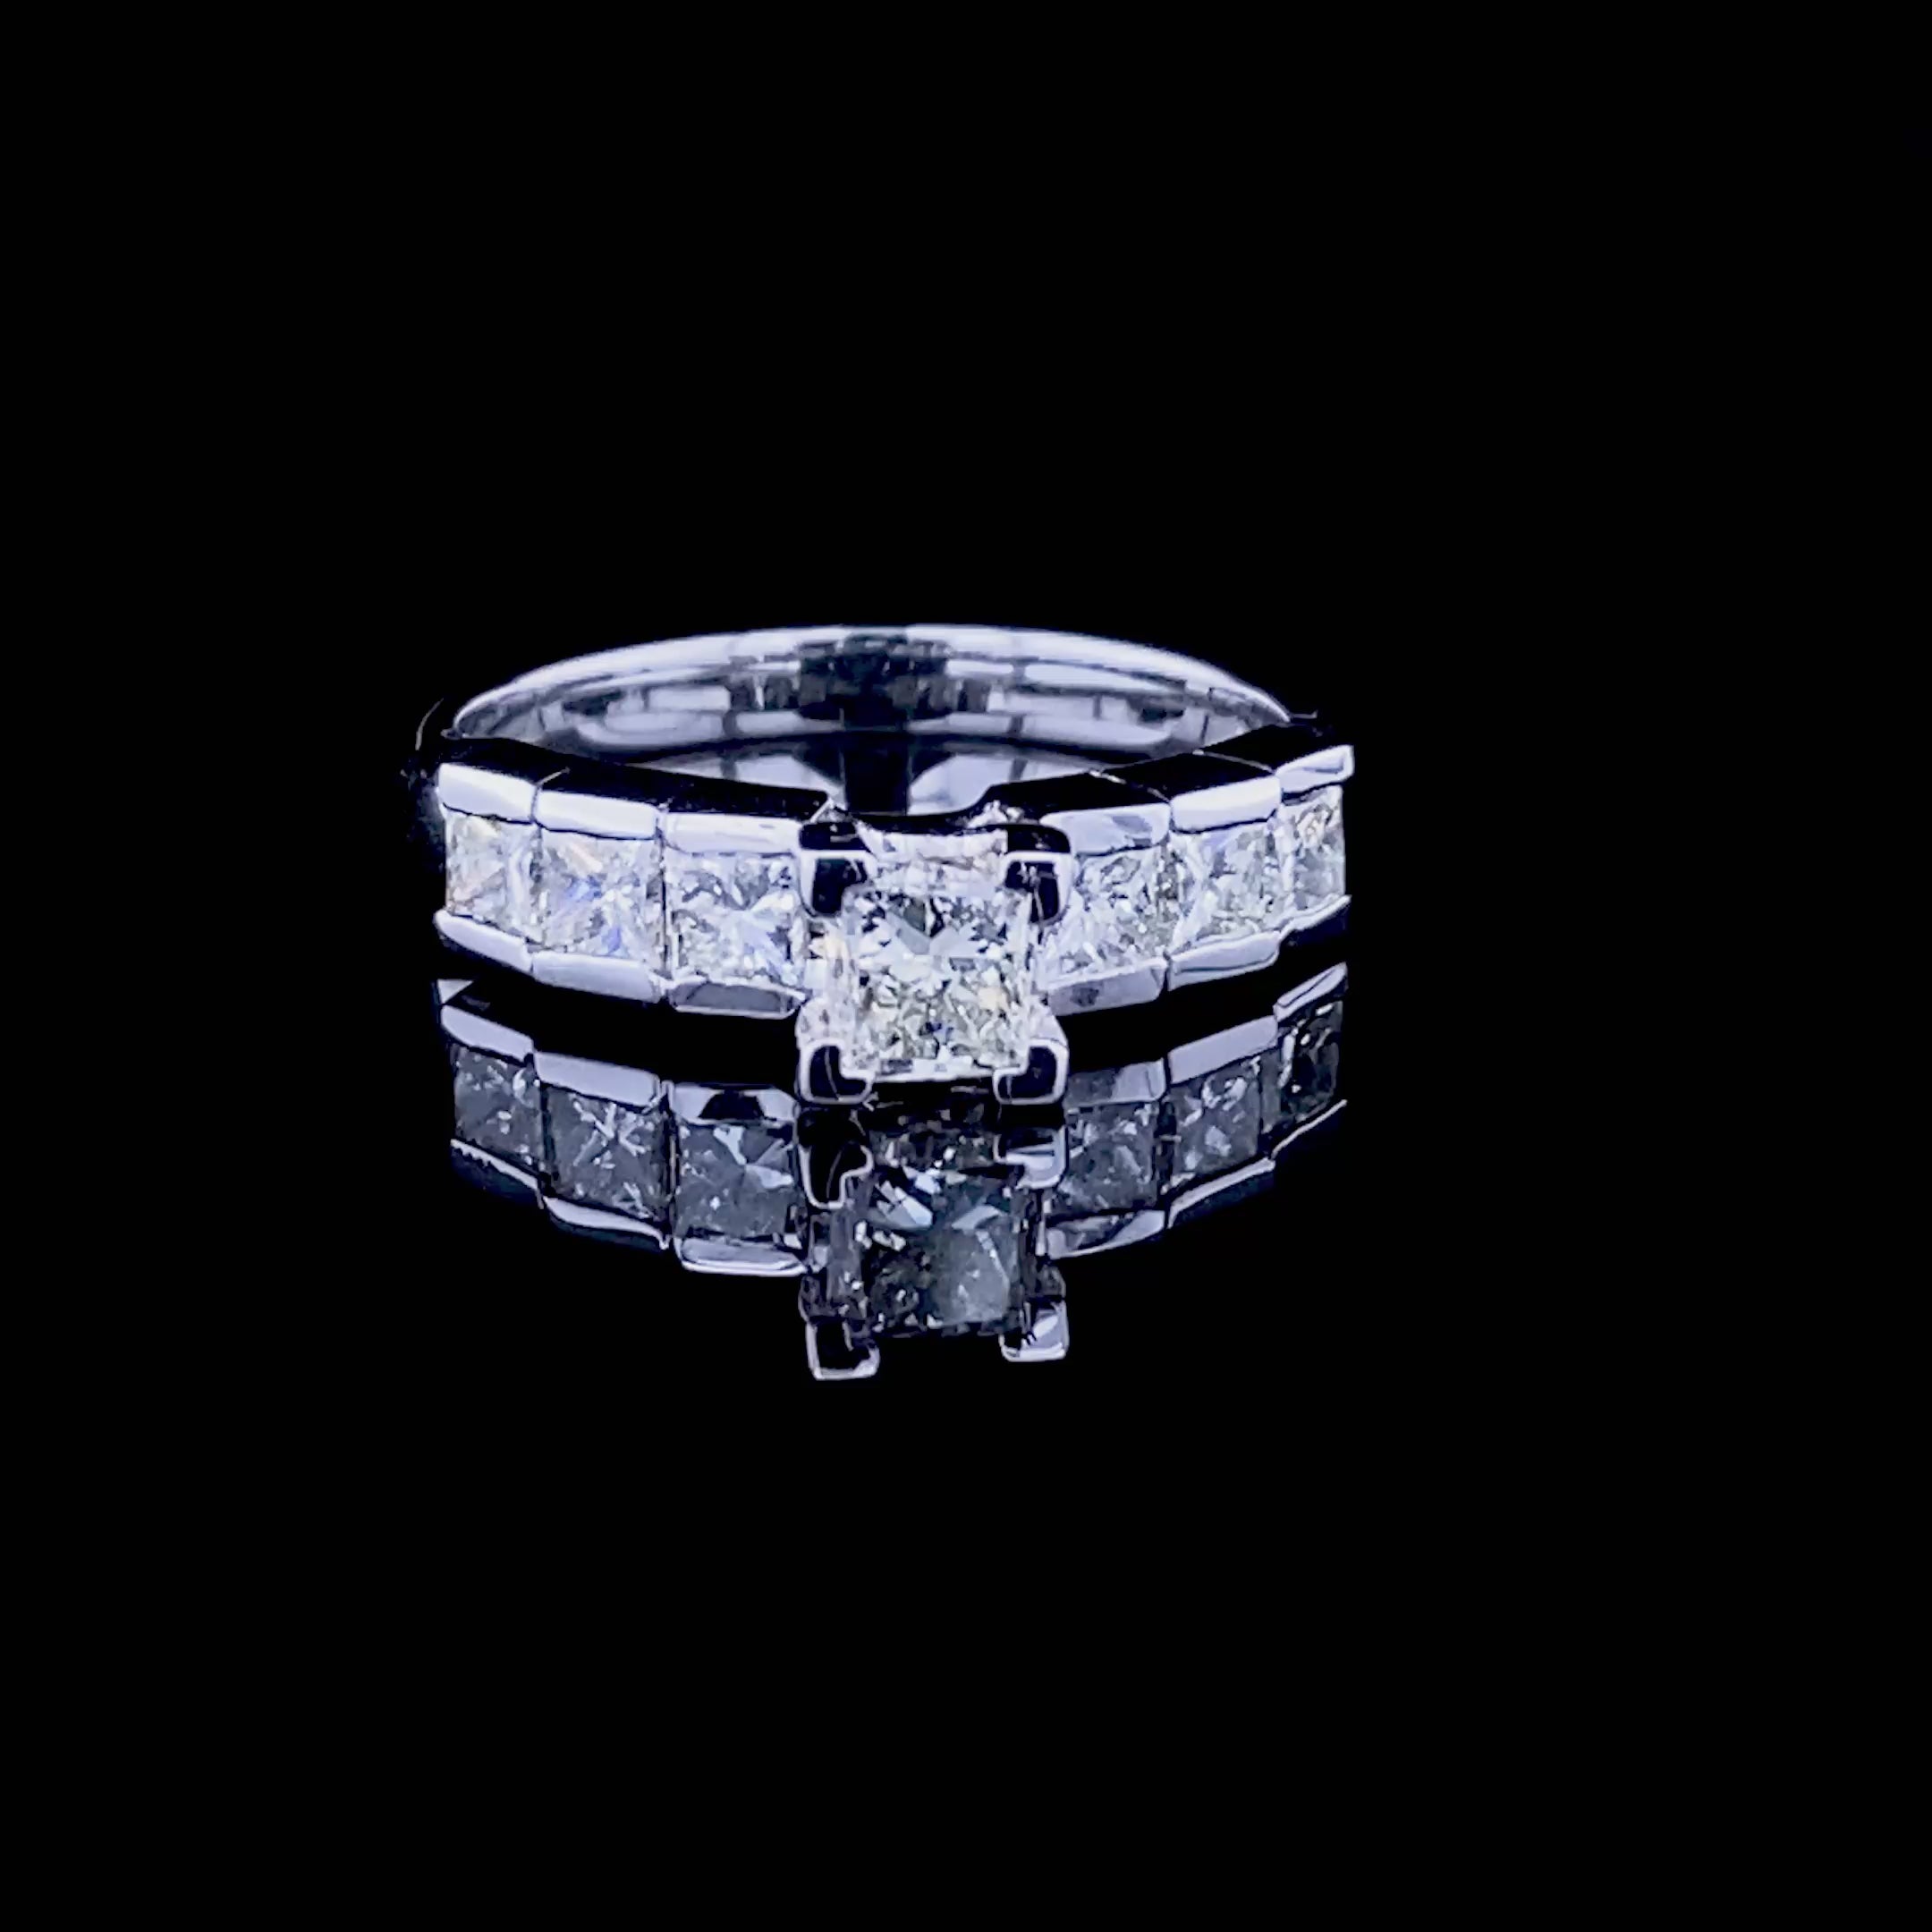 Priceless 1.35 CT Princess Cut Diamond Engagement Ring in 14KT White Gold